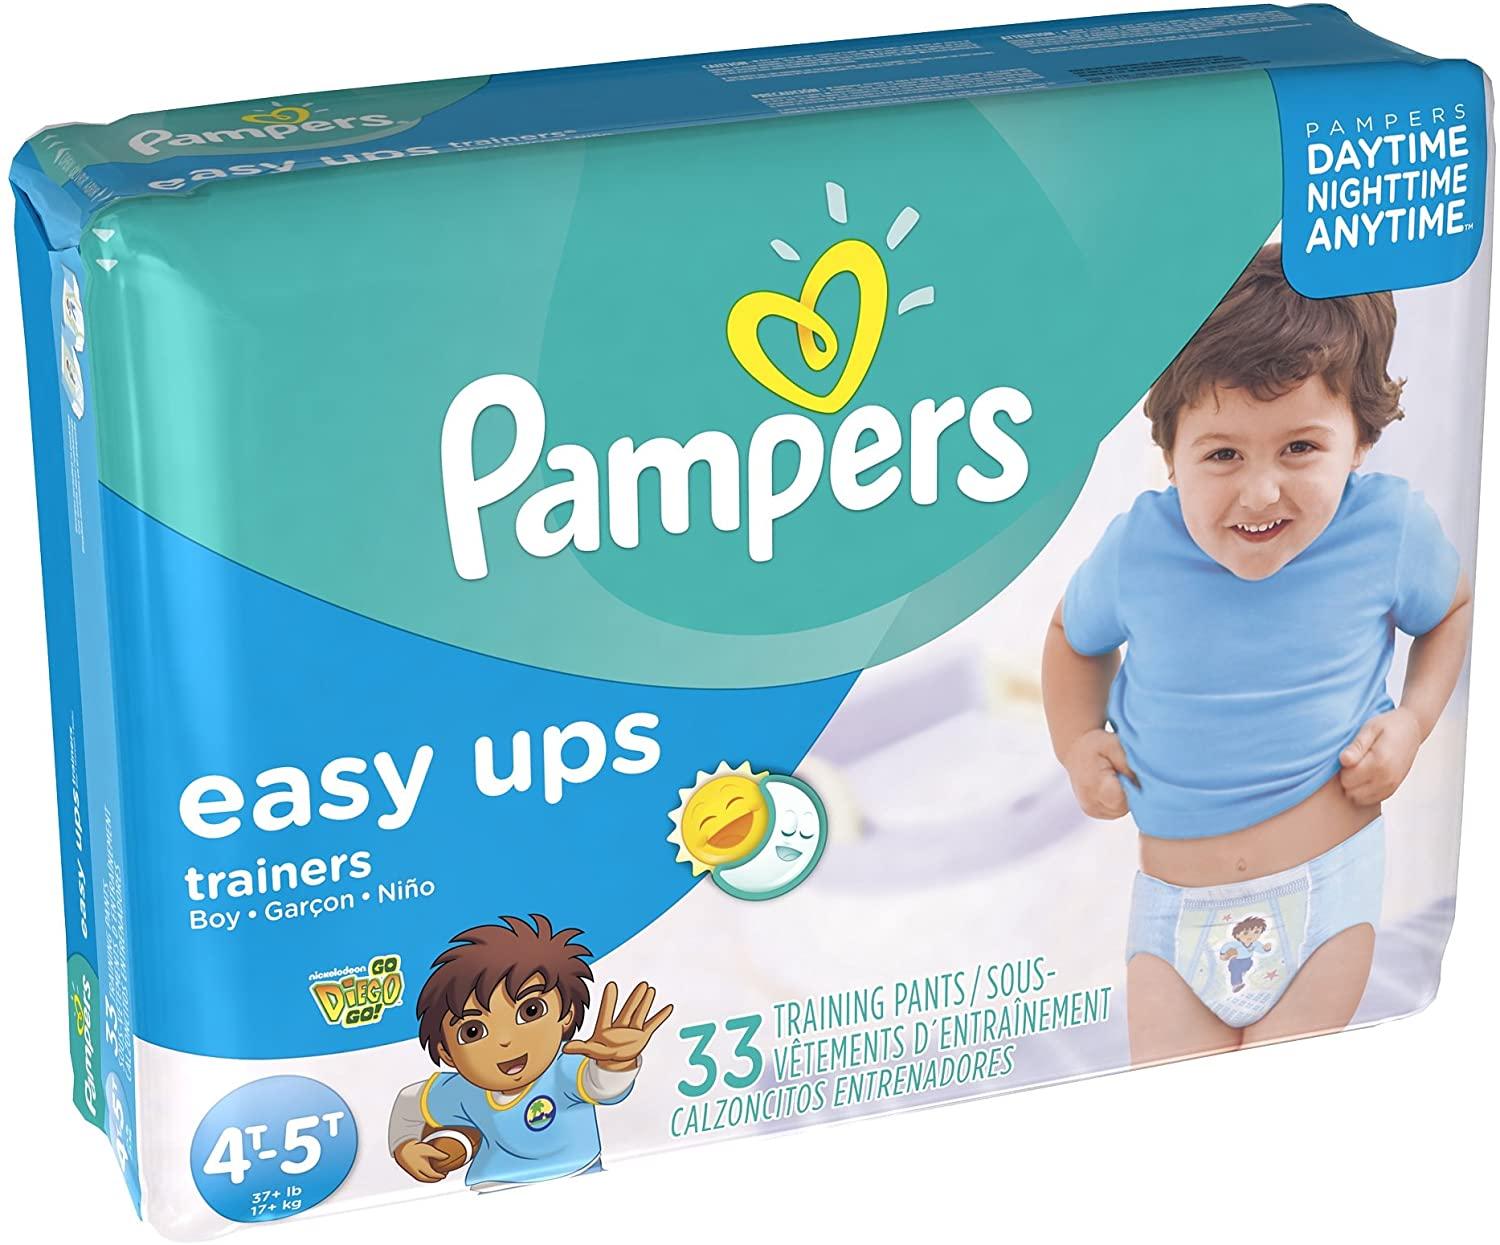 Pampers Easy Ups Pull-On Diapers, Size 6 (37+ lb), Go Diego Go